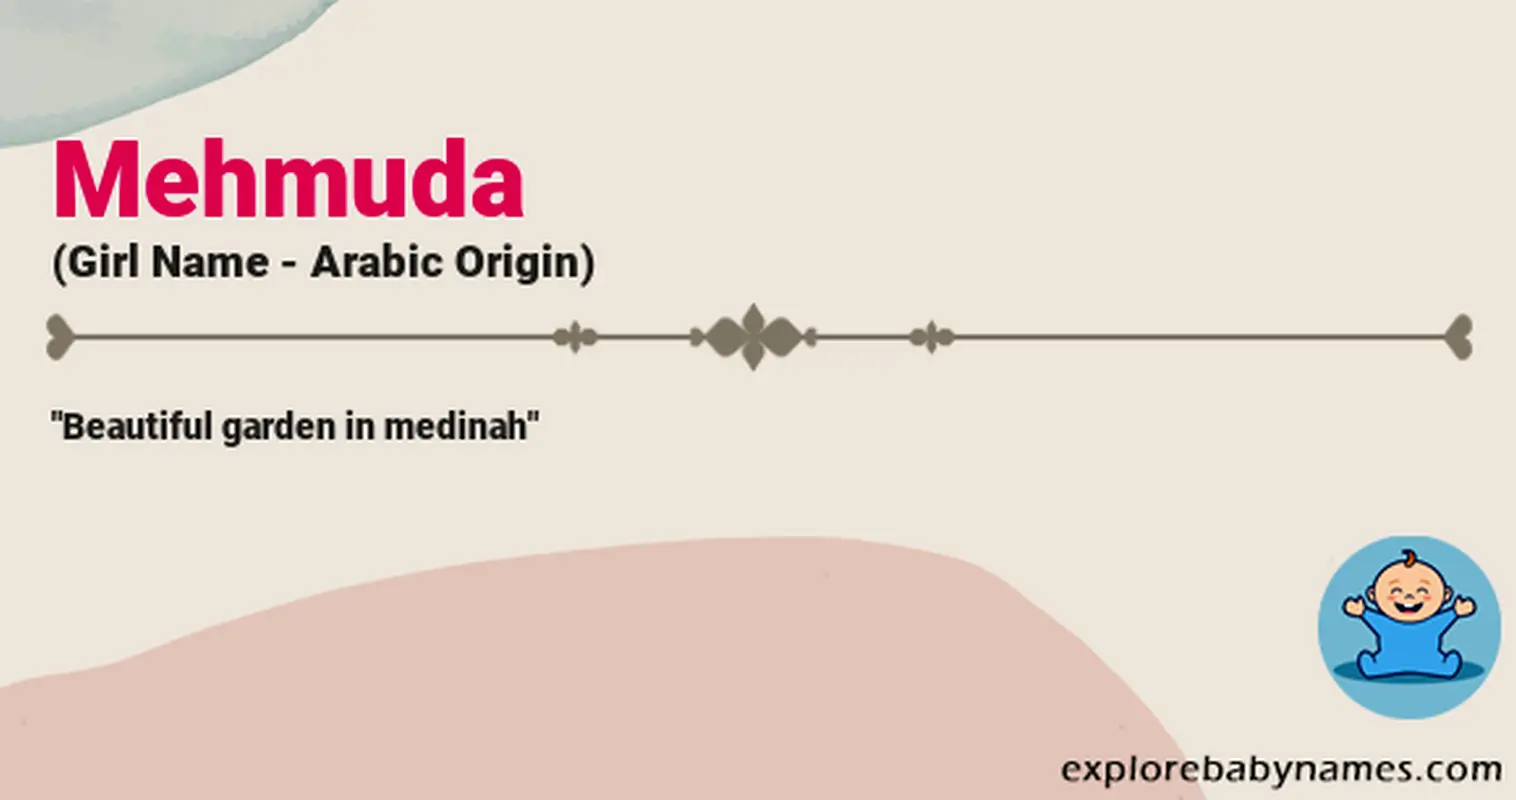 Meaning of Mehmuda